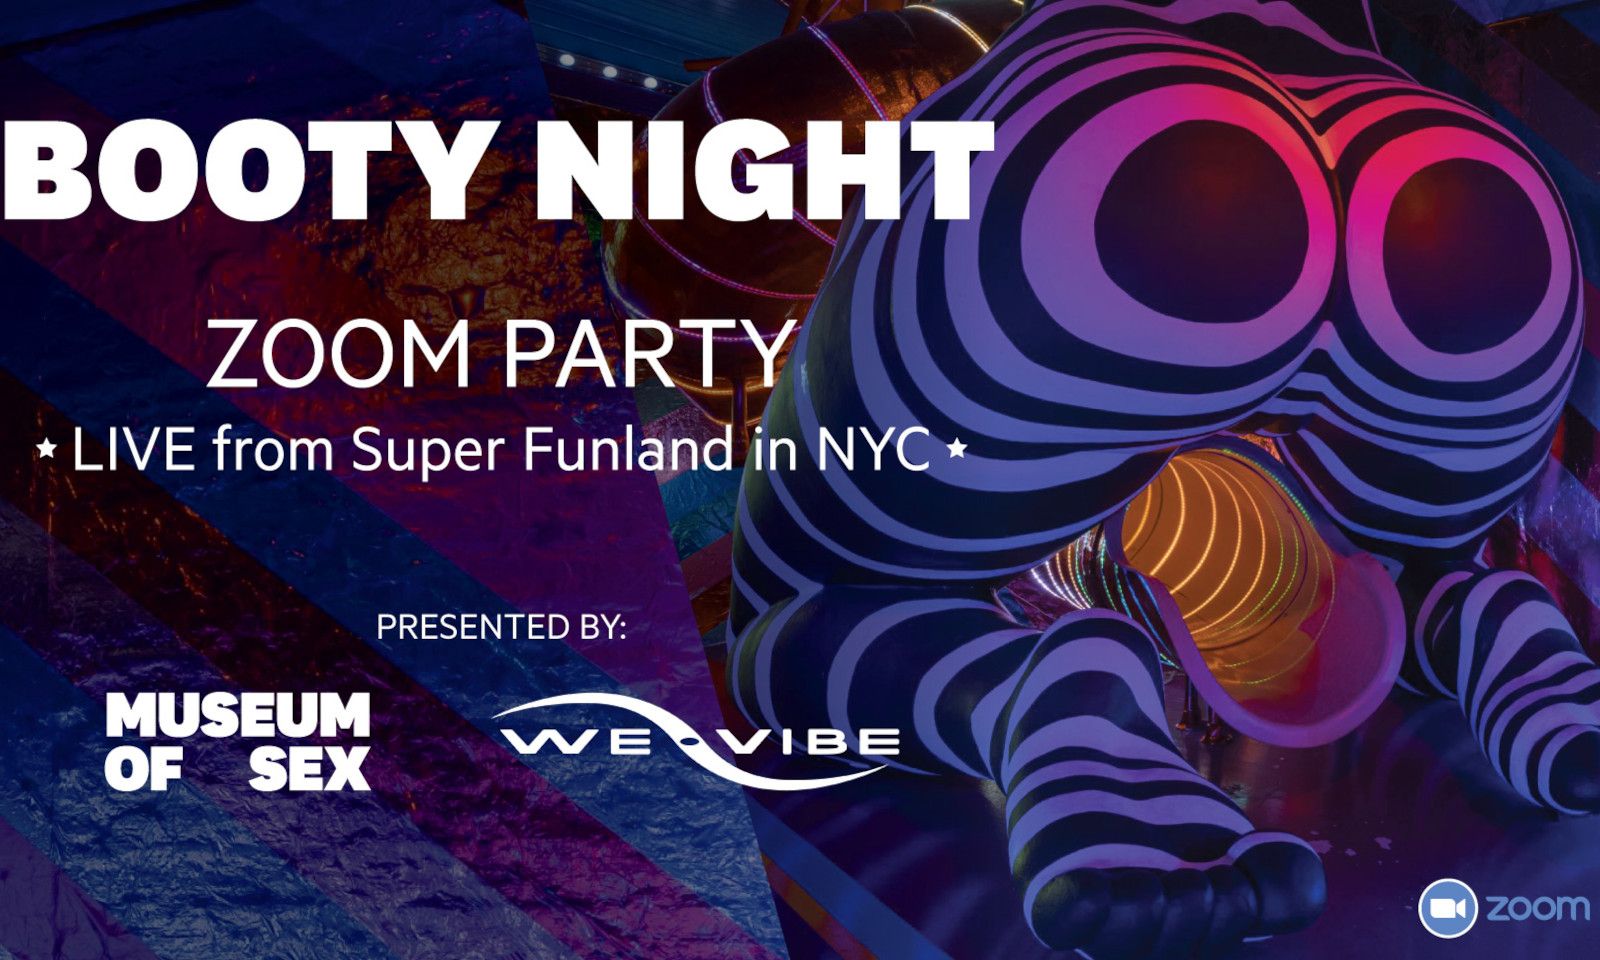 Museum of Sex, We-Vibe to Host 'Booty Night' Zoom Party